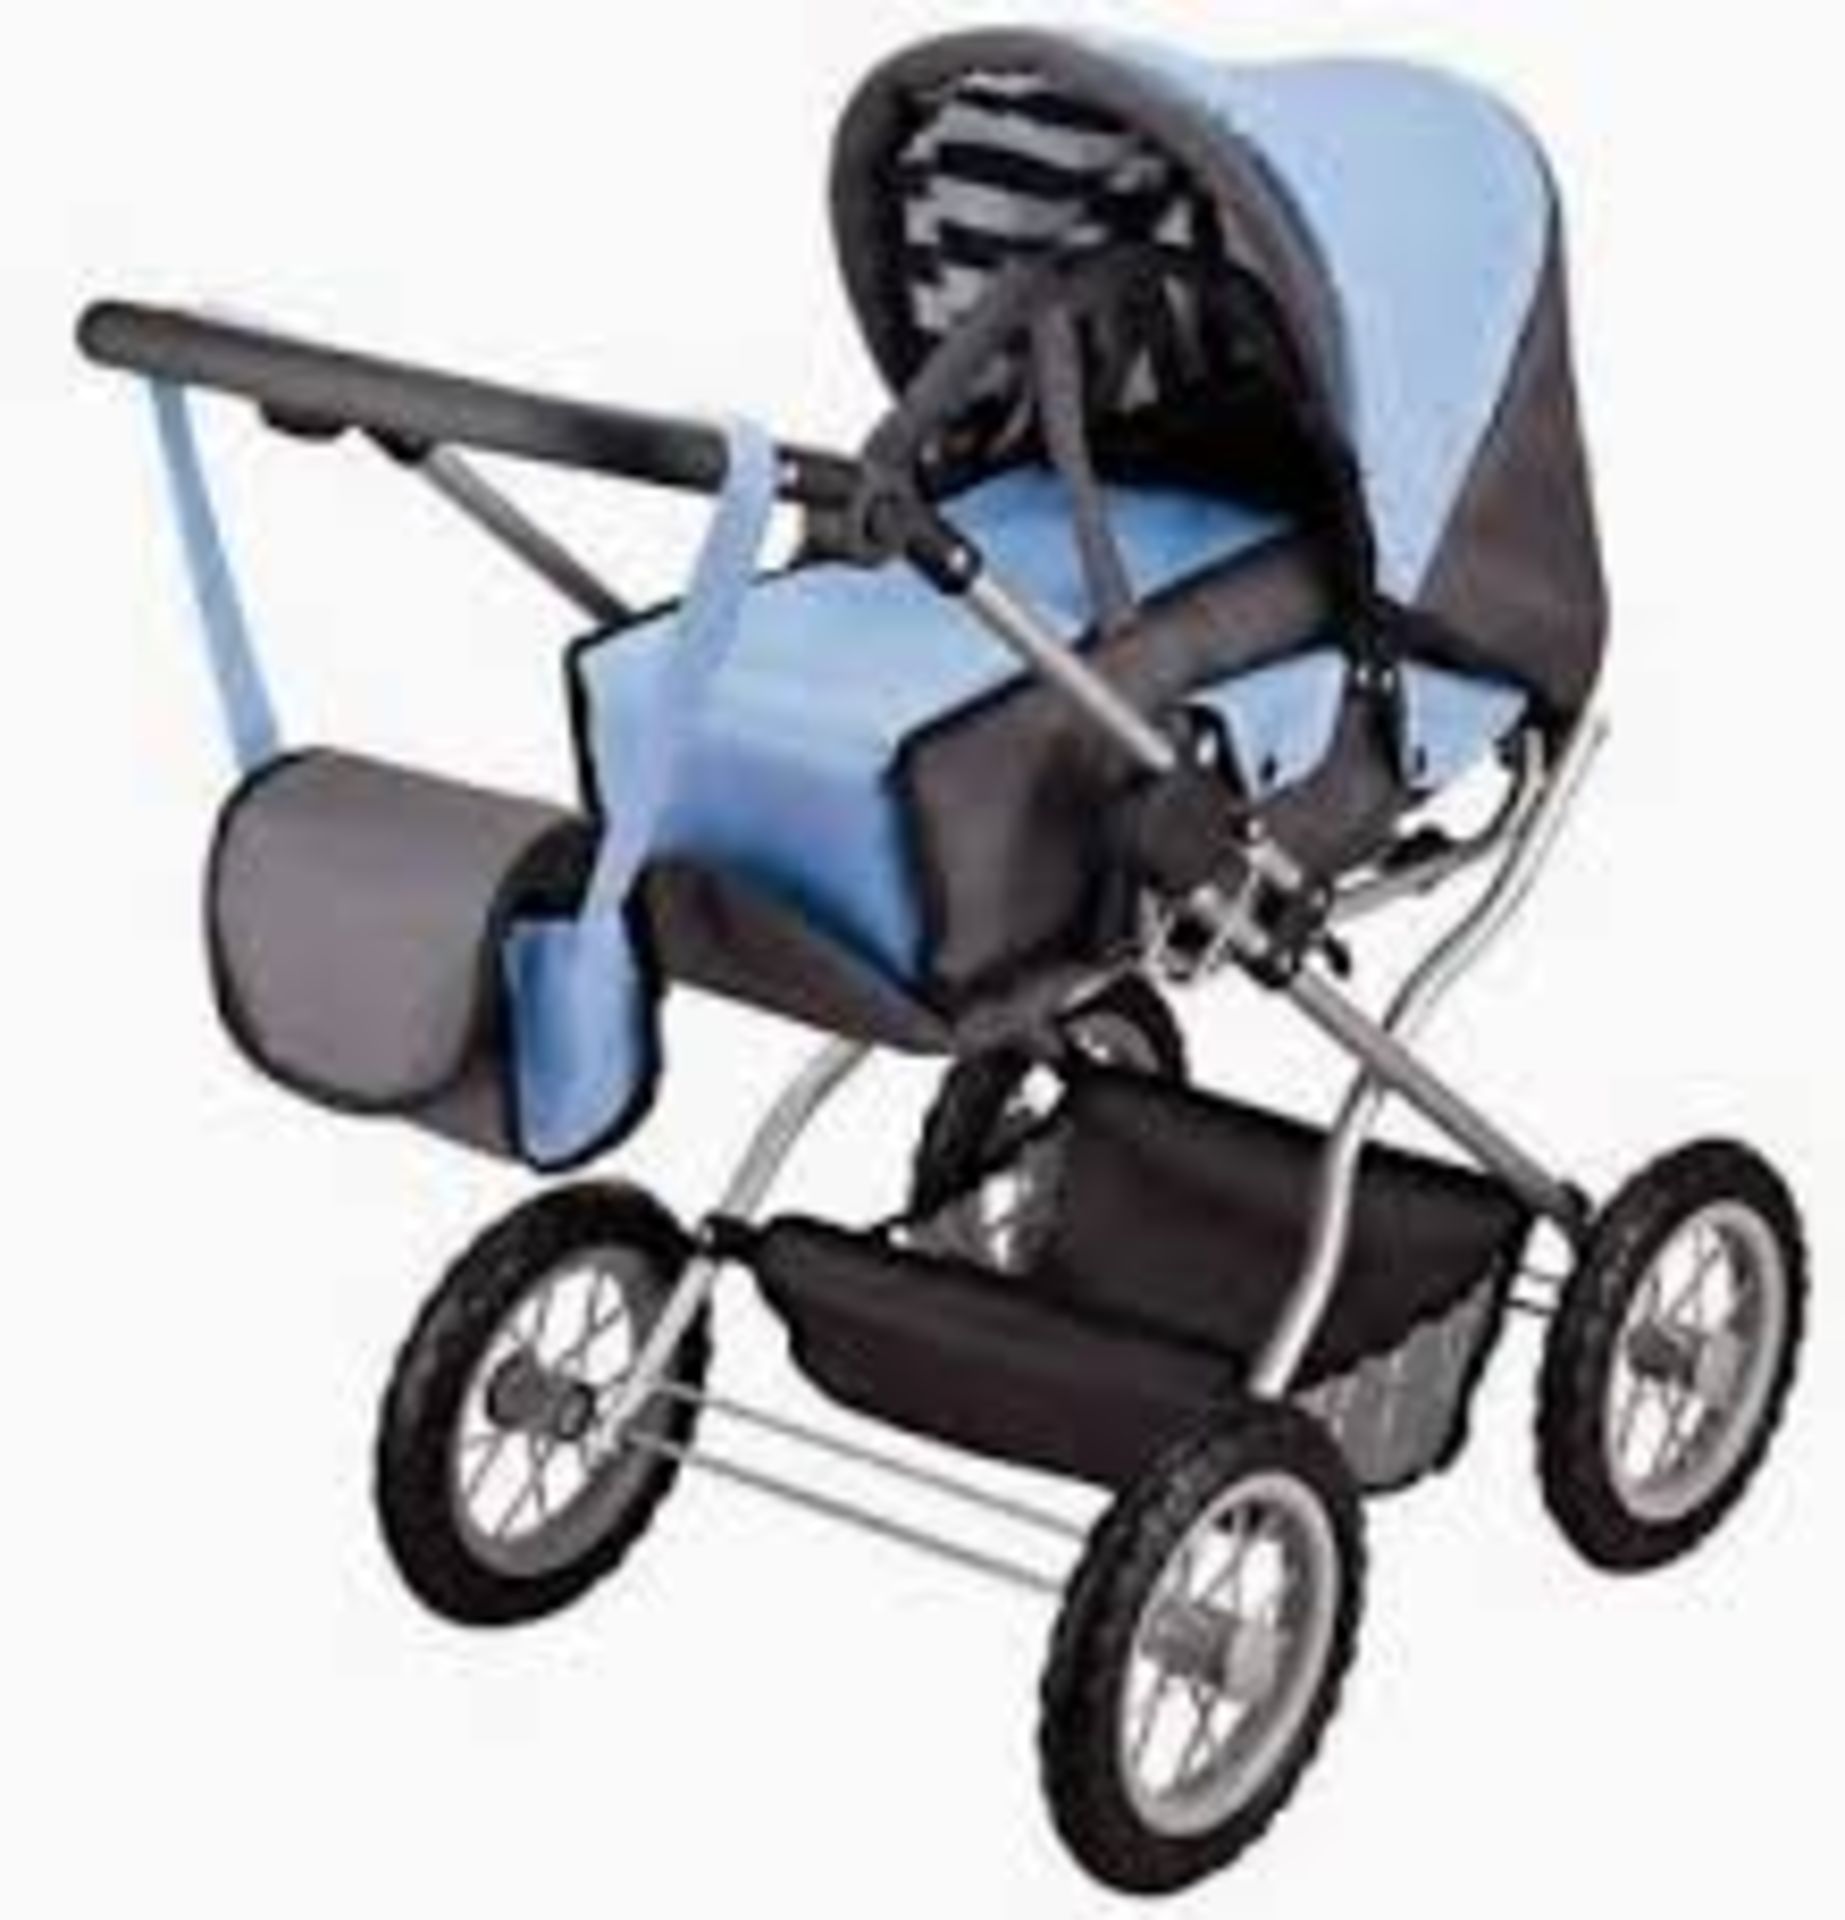 1 x BOXED LARGE COMBI PRAM (17.10.17) *PLEASE NOTE THAT THE BID PRICE IS MULTIPLIED BY THE NUMBER OF